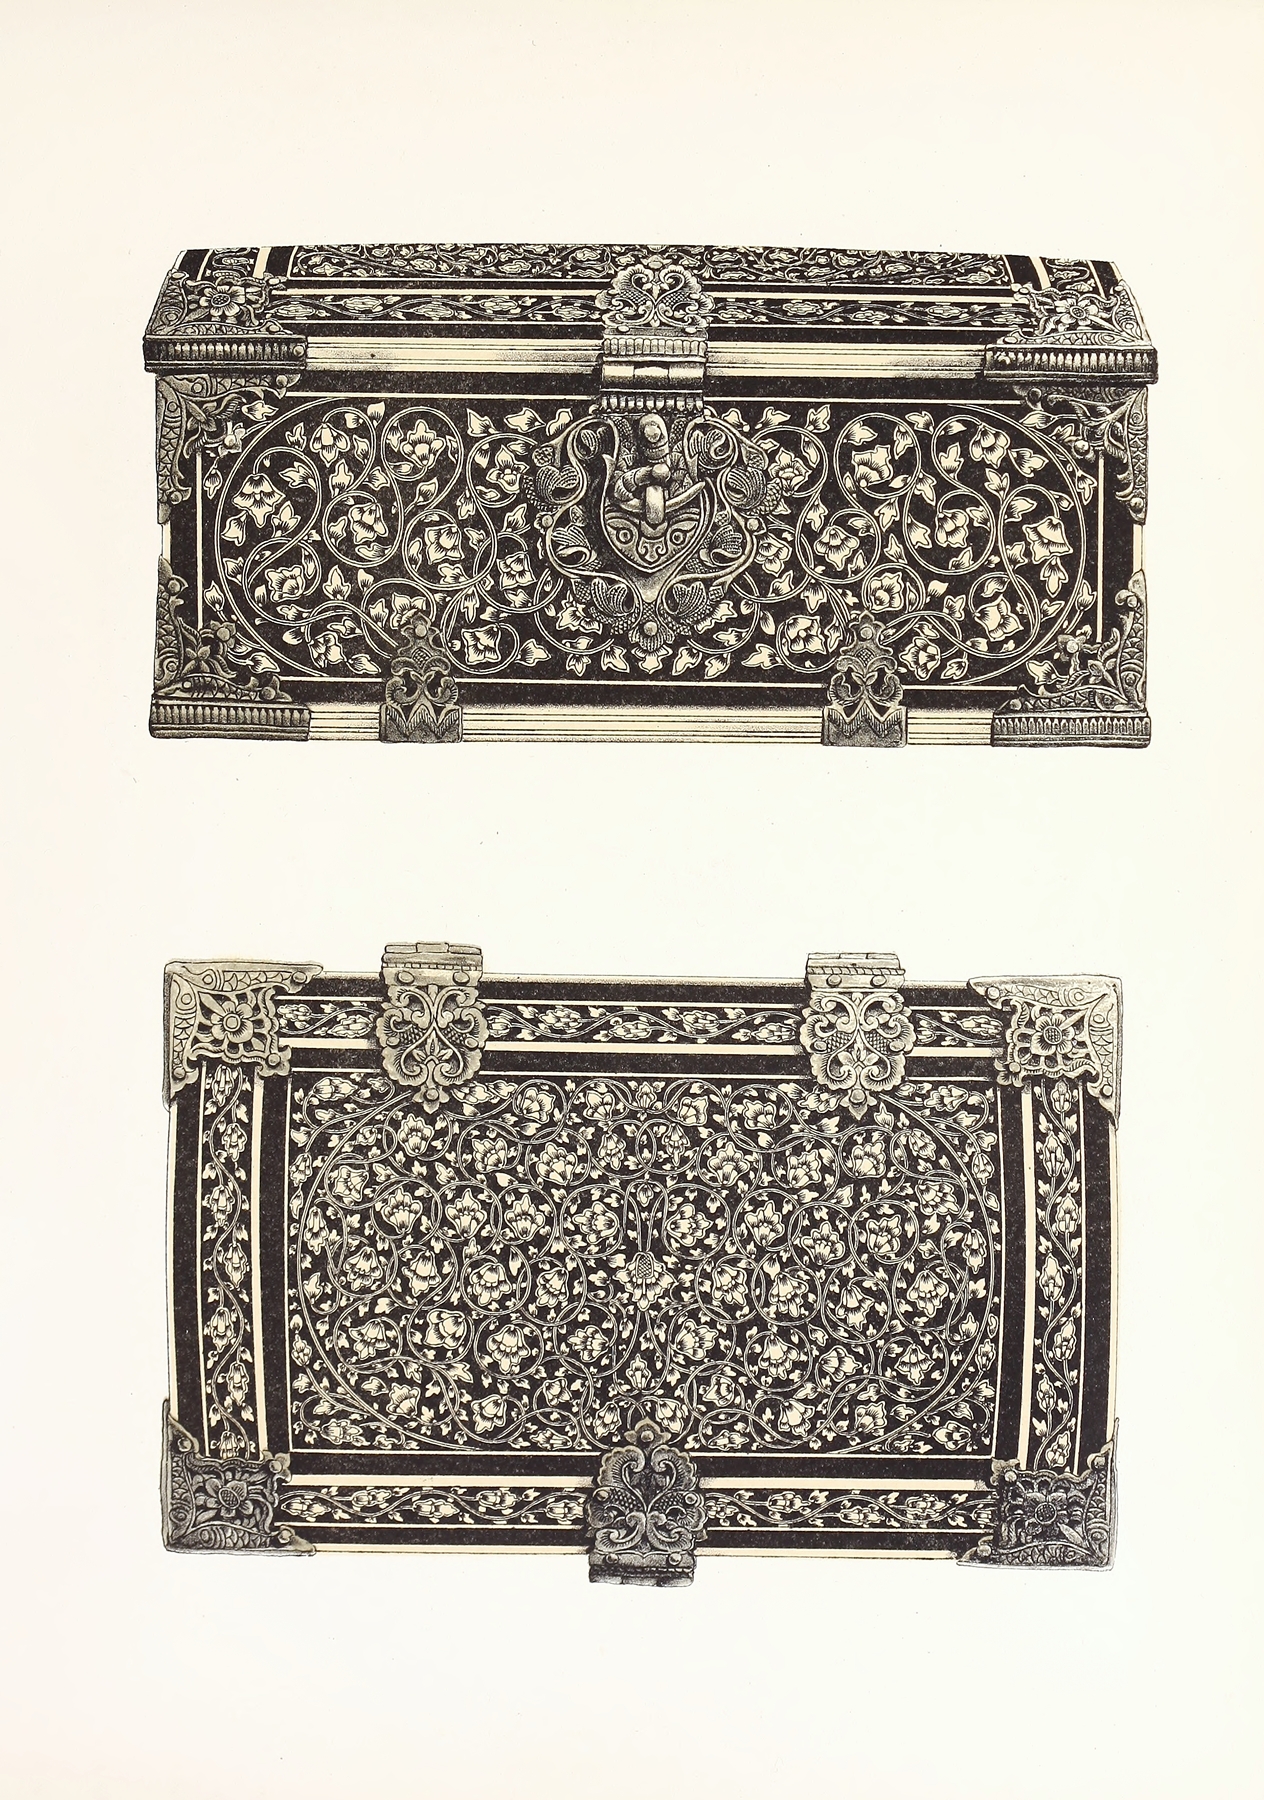 Toilet-Box in Ebony, inlaid with Ivory, and mounted with Silver, Oriental Work 썸네일